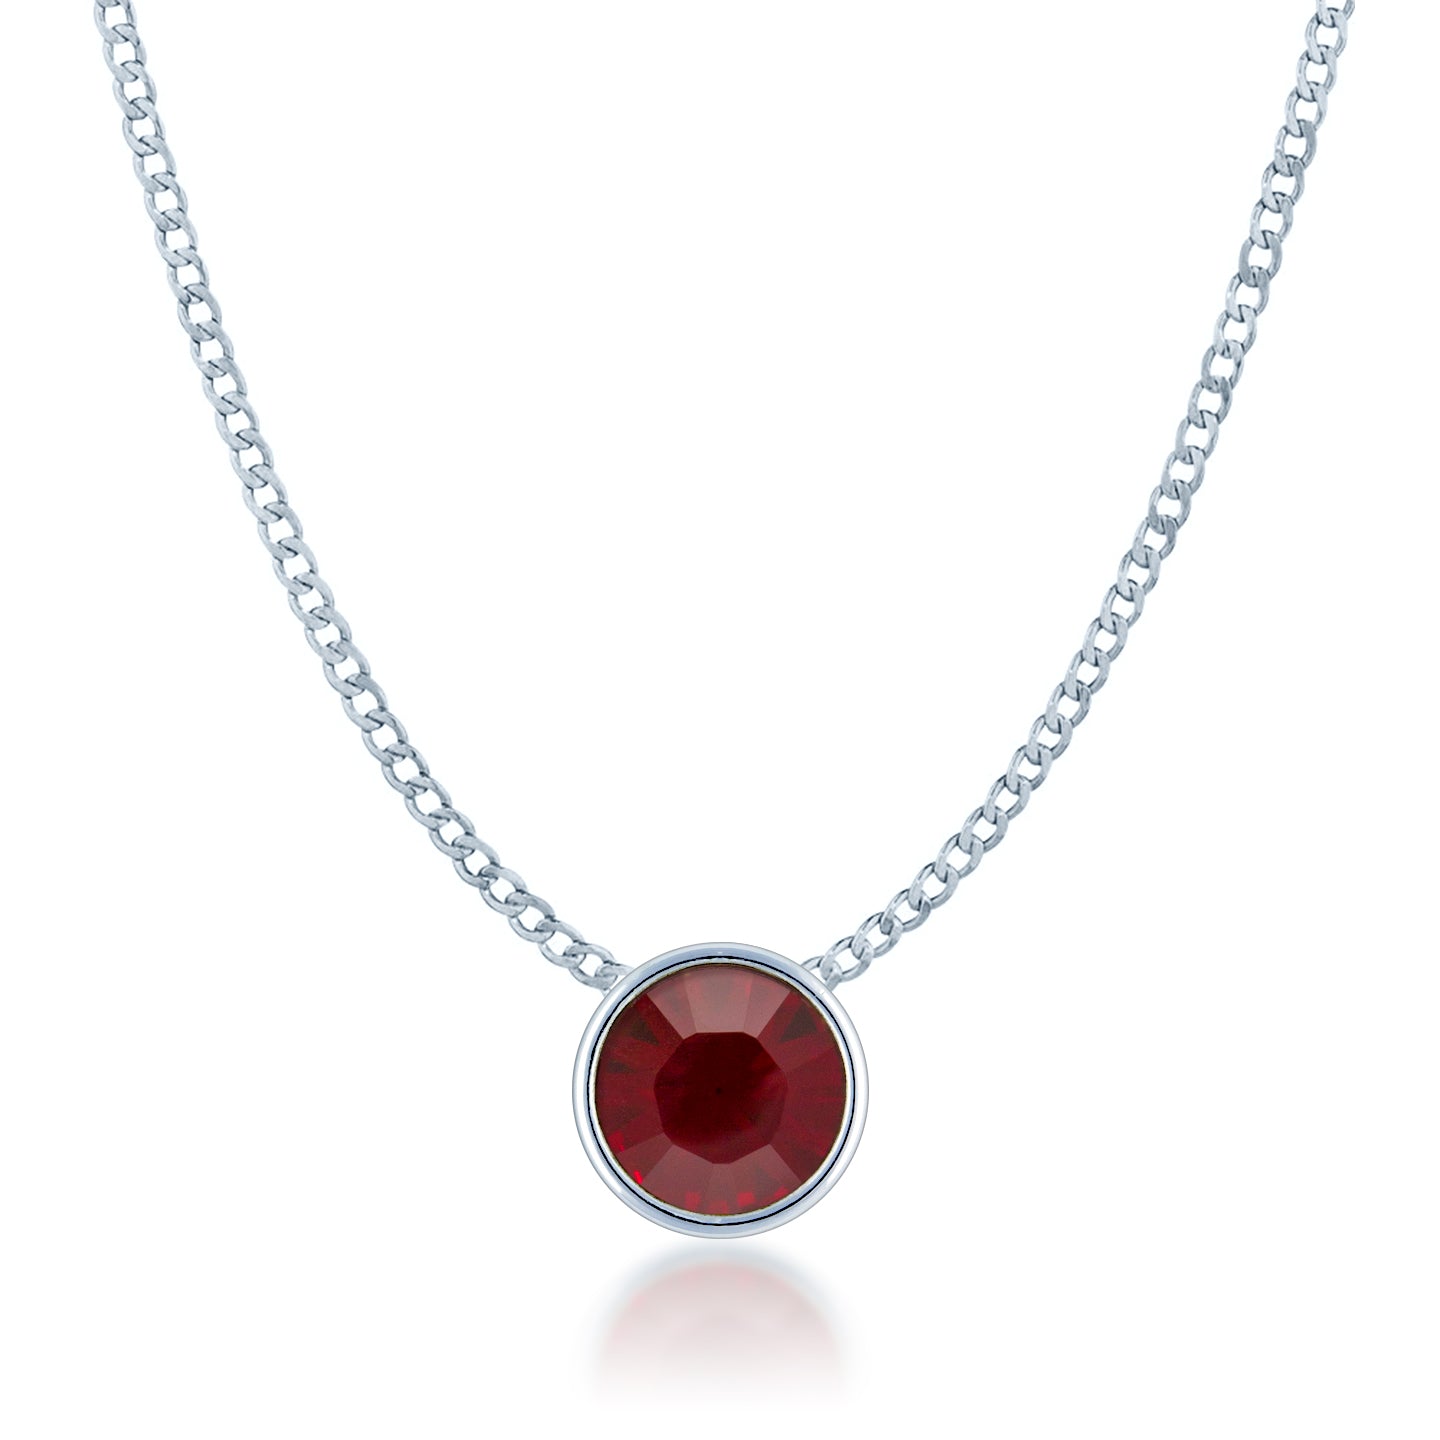 Harley Small Pendant Necklace with Red Siam Round Crystals from Swarovski Silver Toned Rhodium Plated - Ed Heart